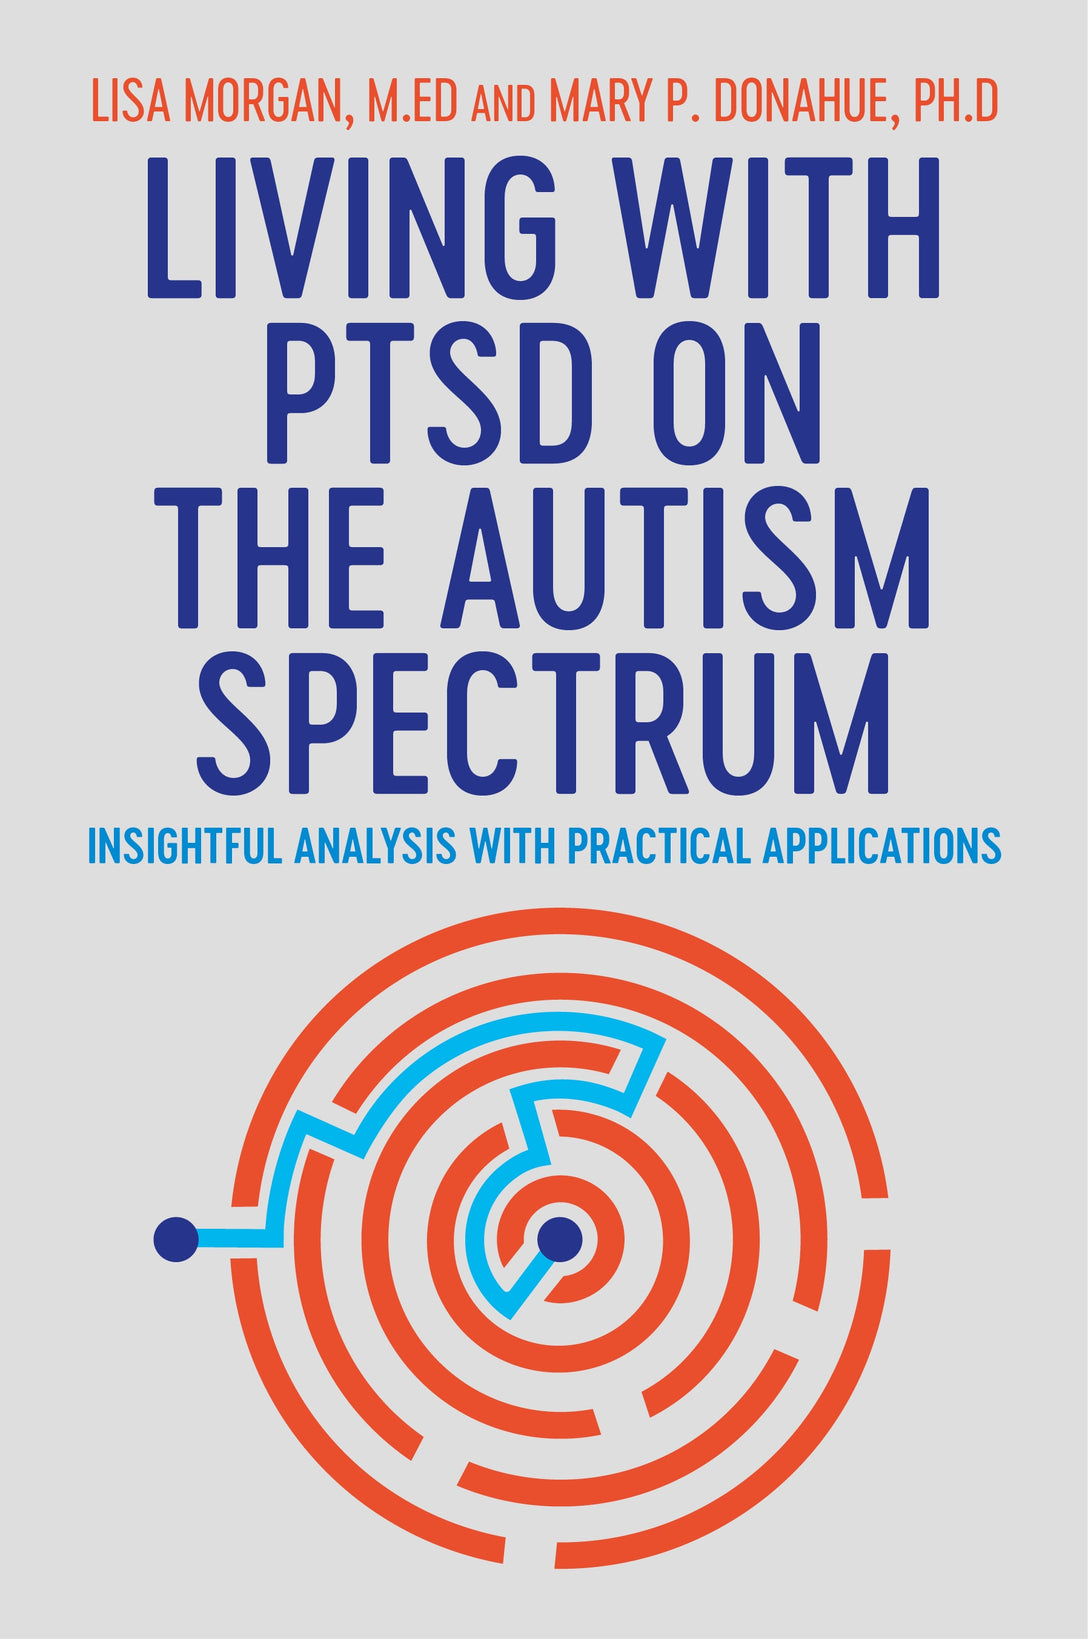 Living with PTSD on the Autism Spectrum by Lisa Morgan, Mary Donahue